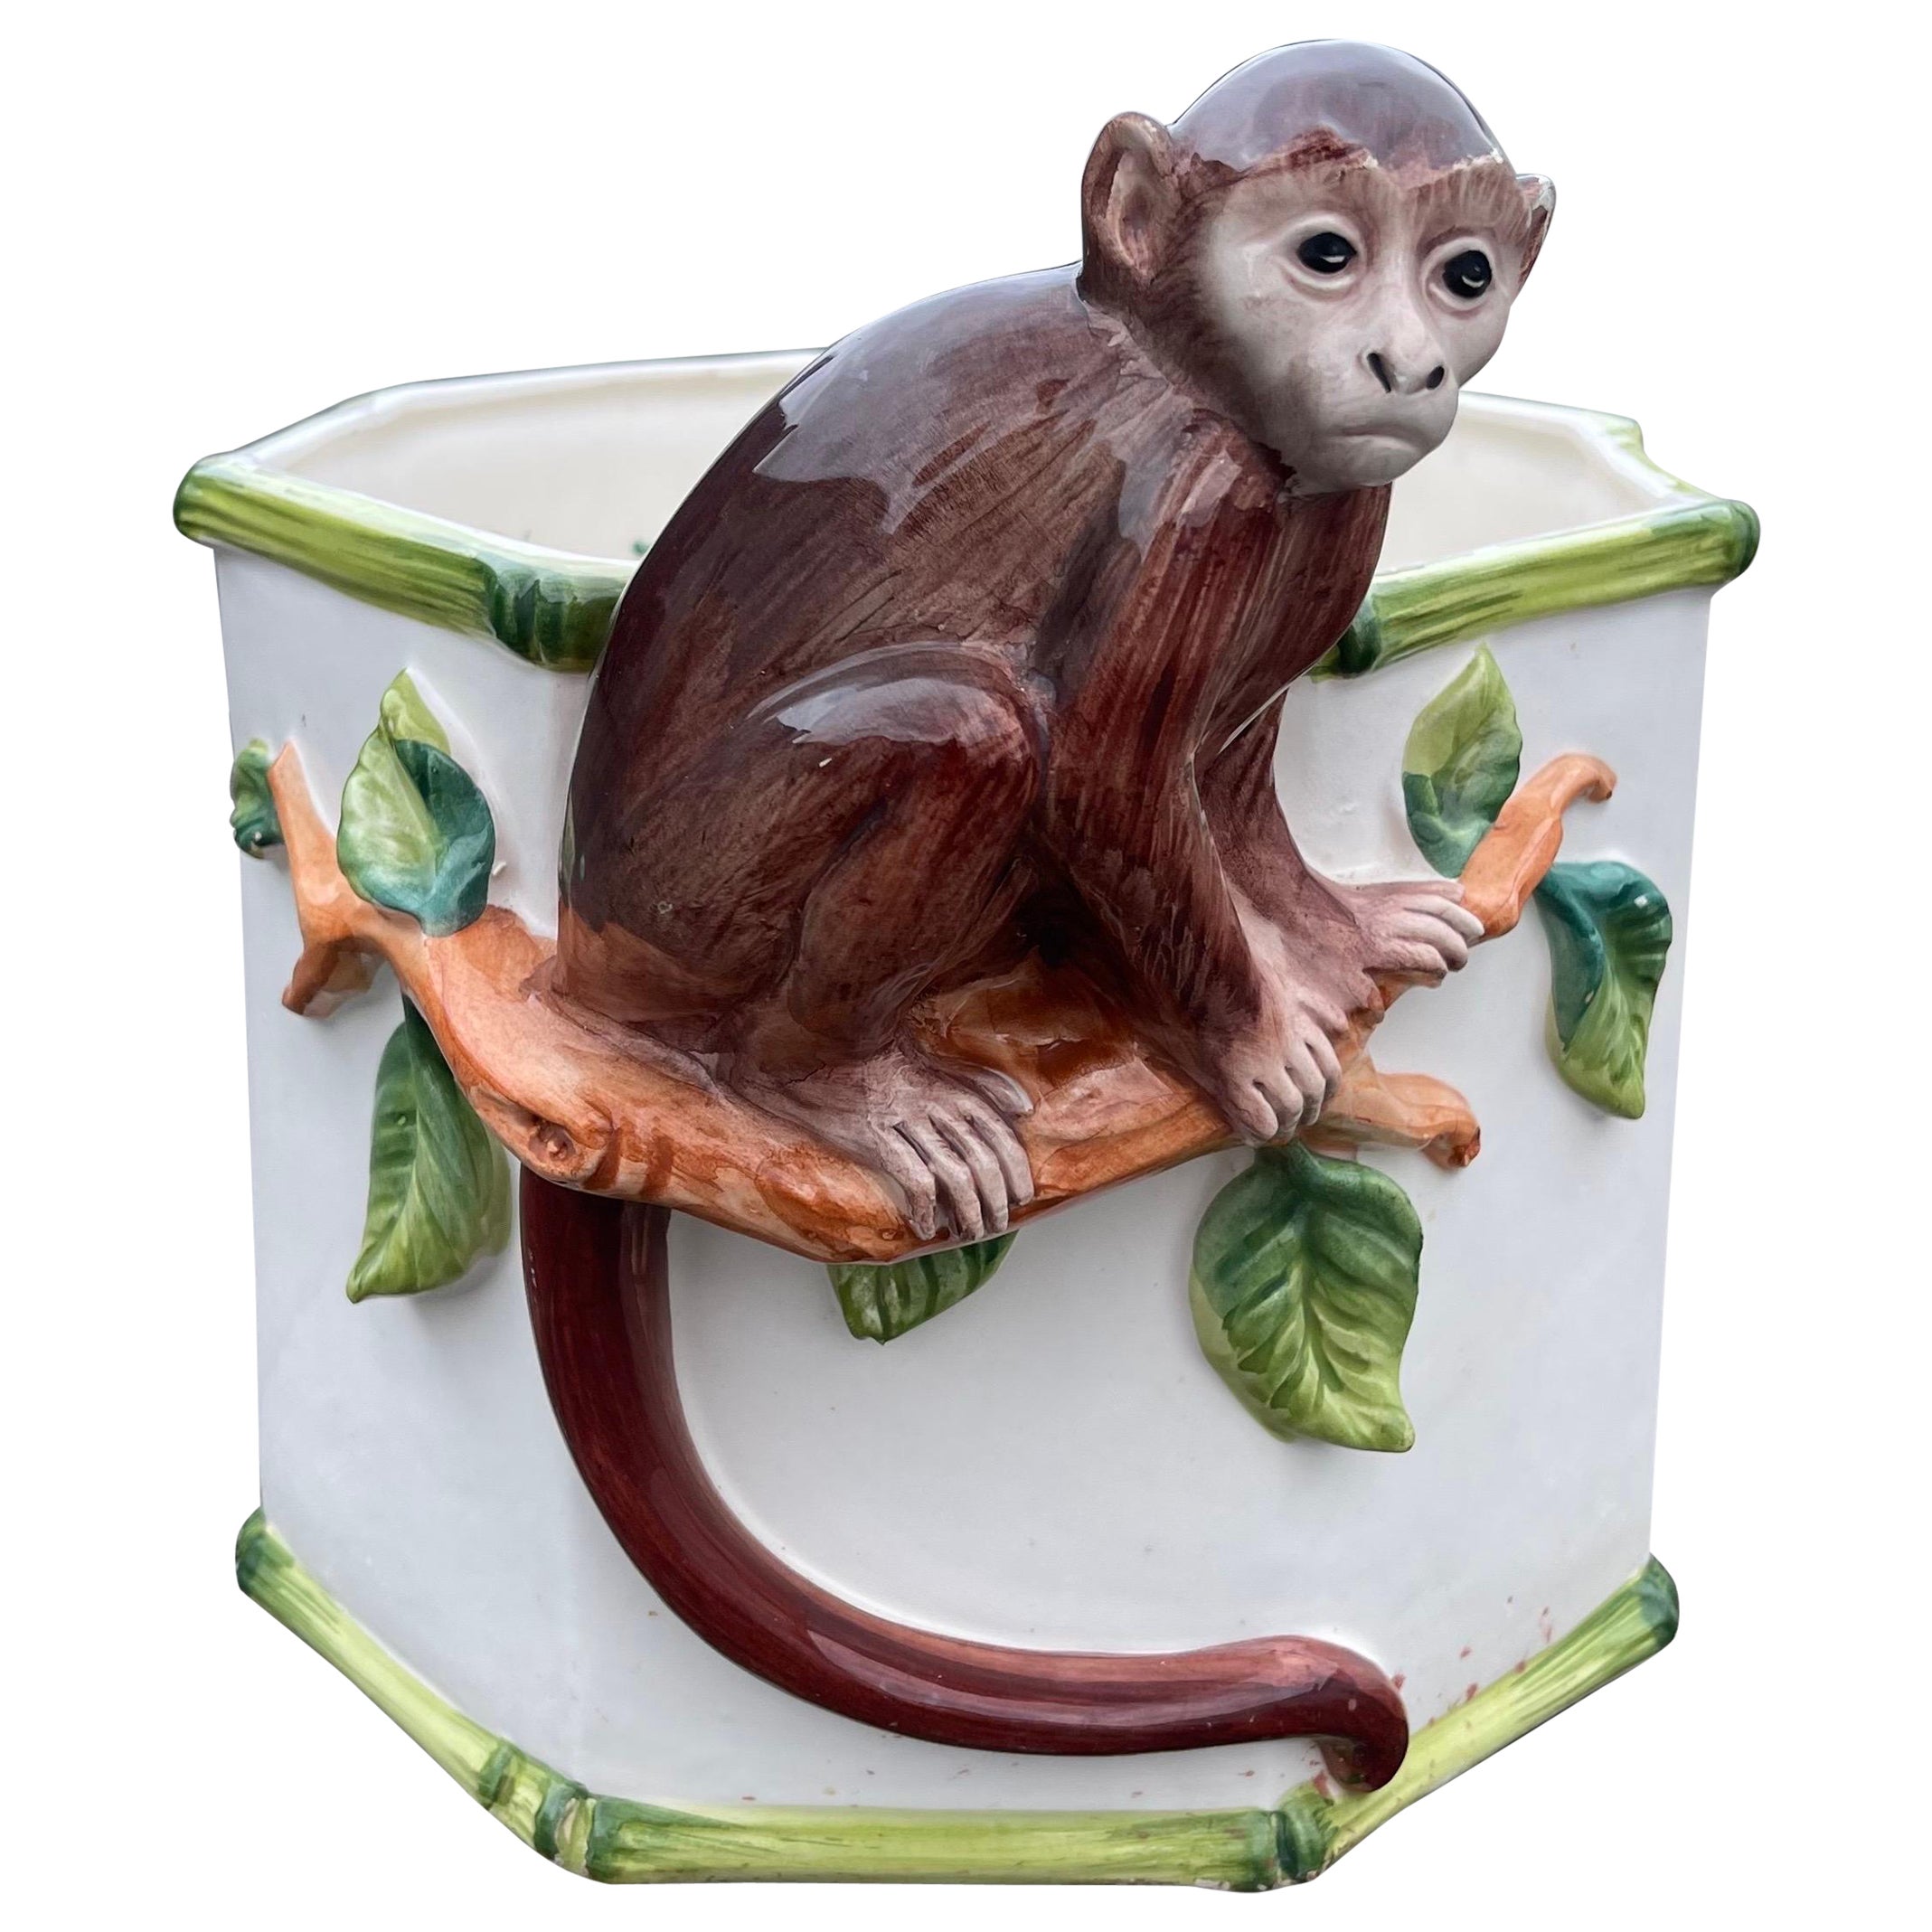 Grosselle Italy Hand Painted Ceramic Monkey Cachepot Vase Pot, Faux Bamboo